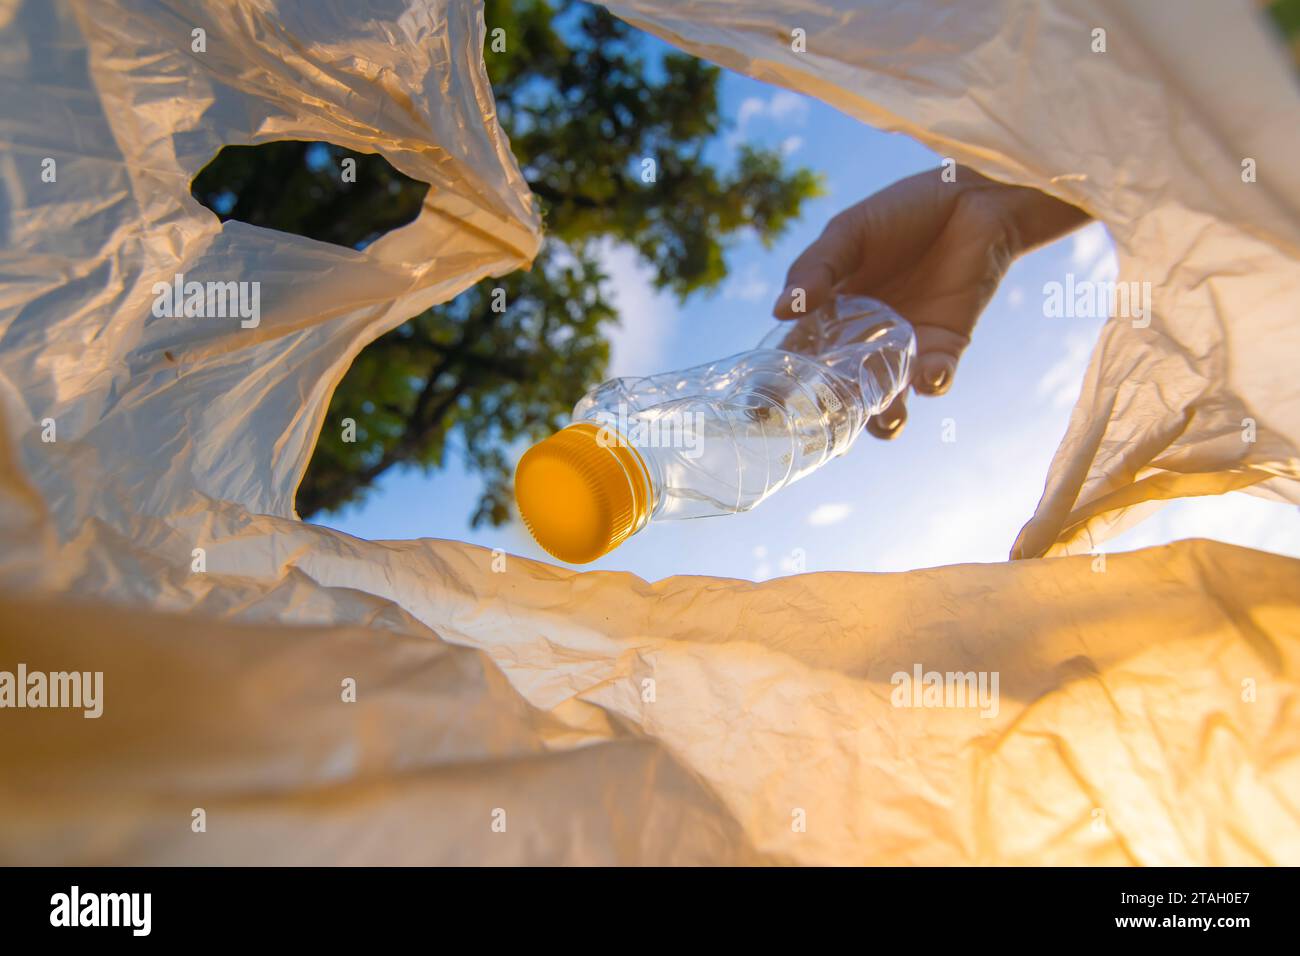 Volunteer Collecting plastic bottle waste at public parks for recycling, Reuse, and waste management concepts. Stock Photo